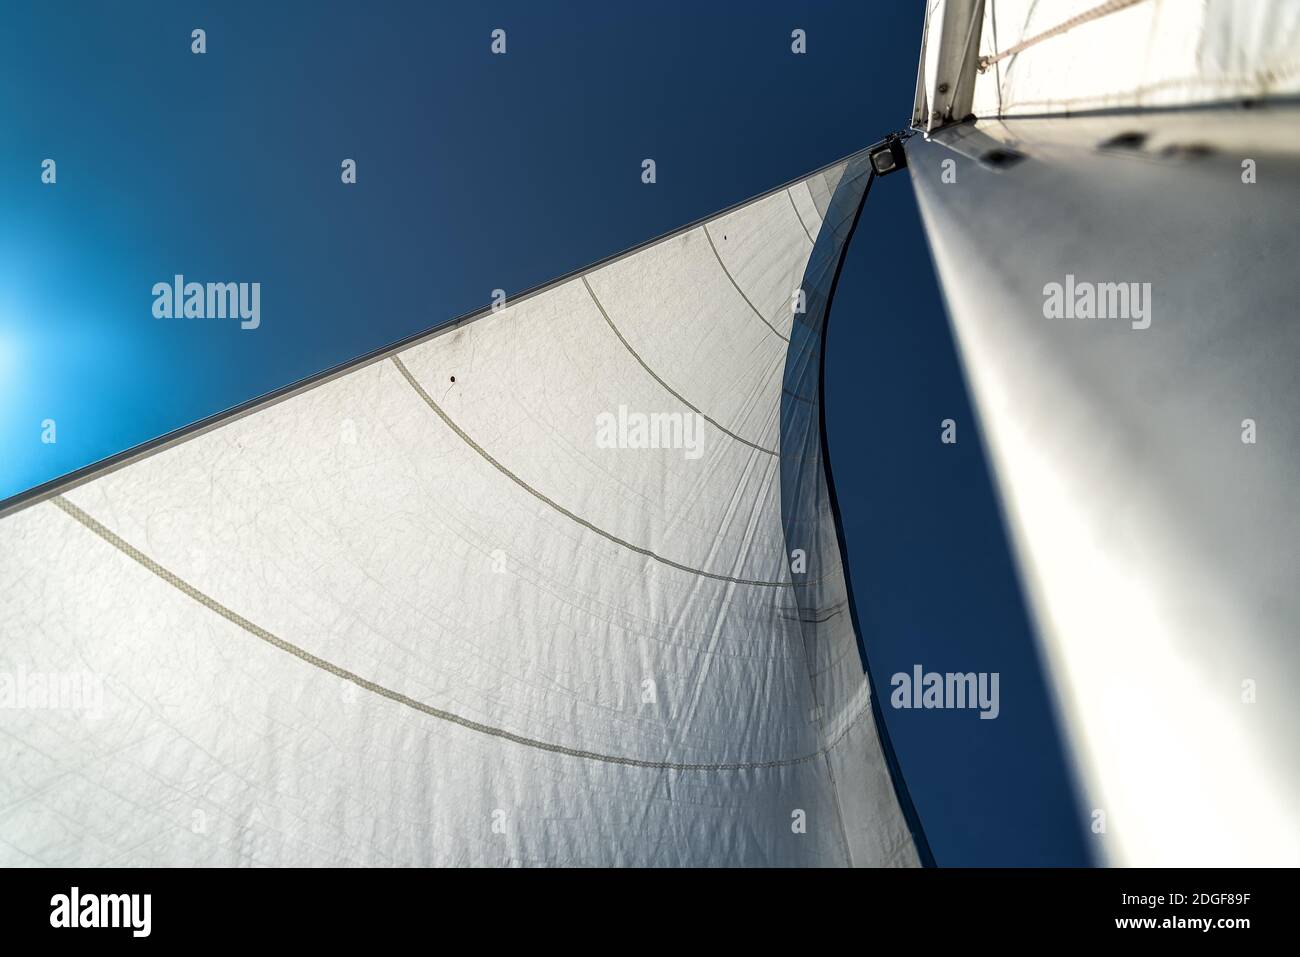 Sails in the wind Stock Photo